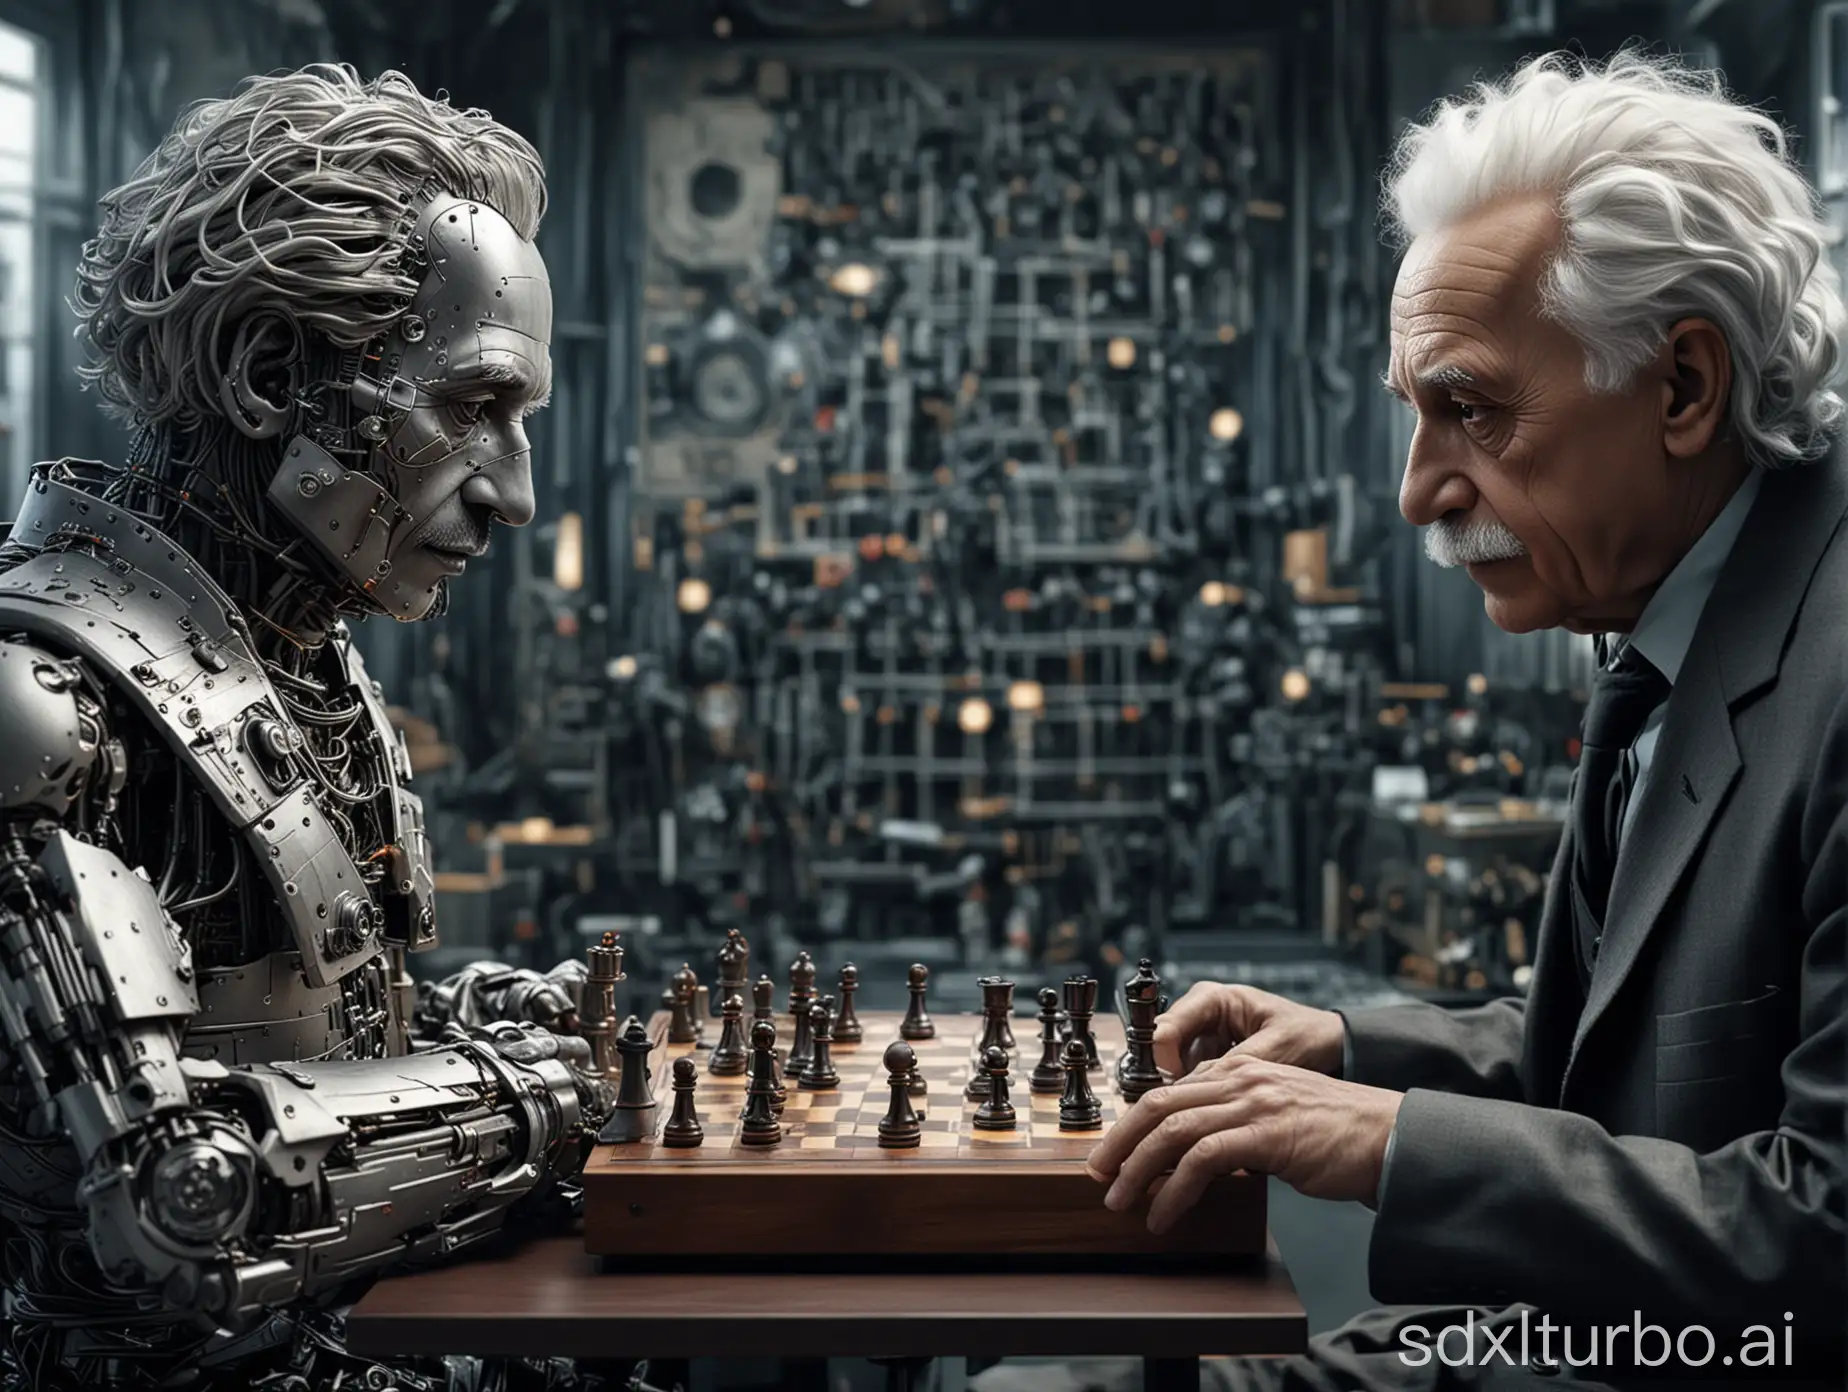 Futuristic-Cyborg-Playing-Chess-with-Albert-Einstein-in-Virtual-Reality